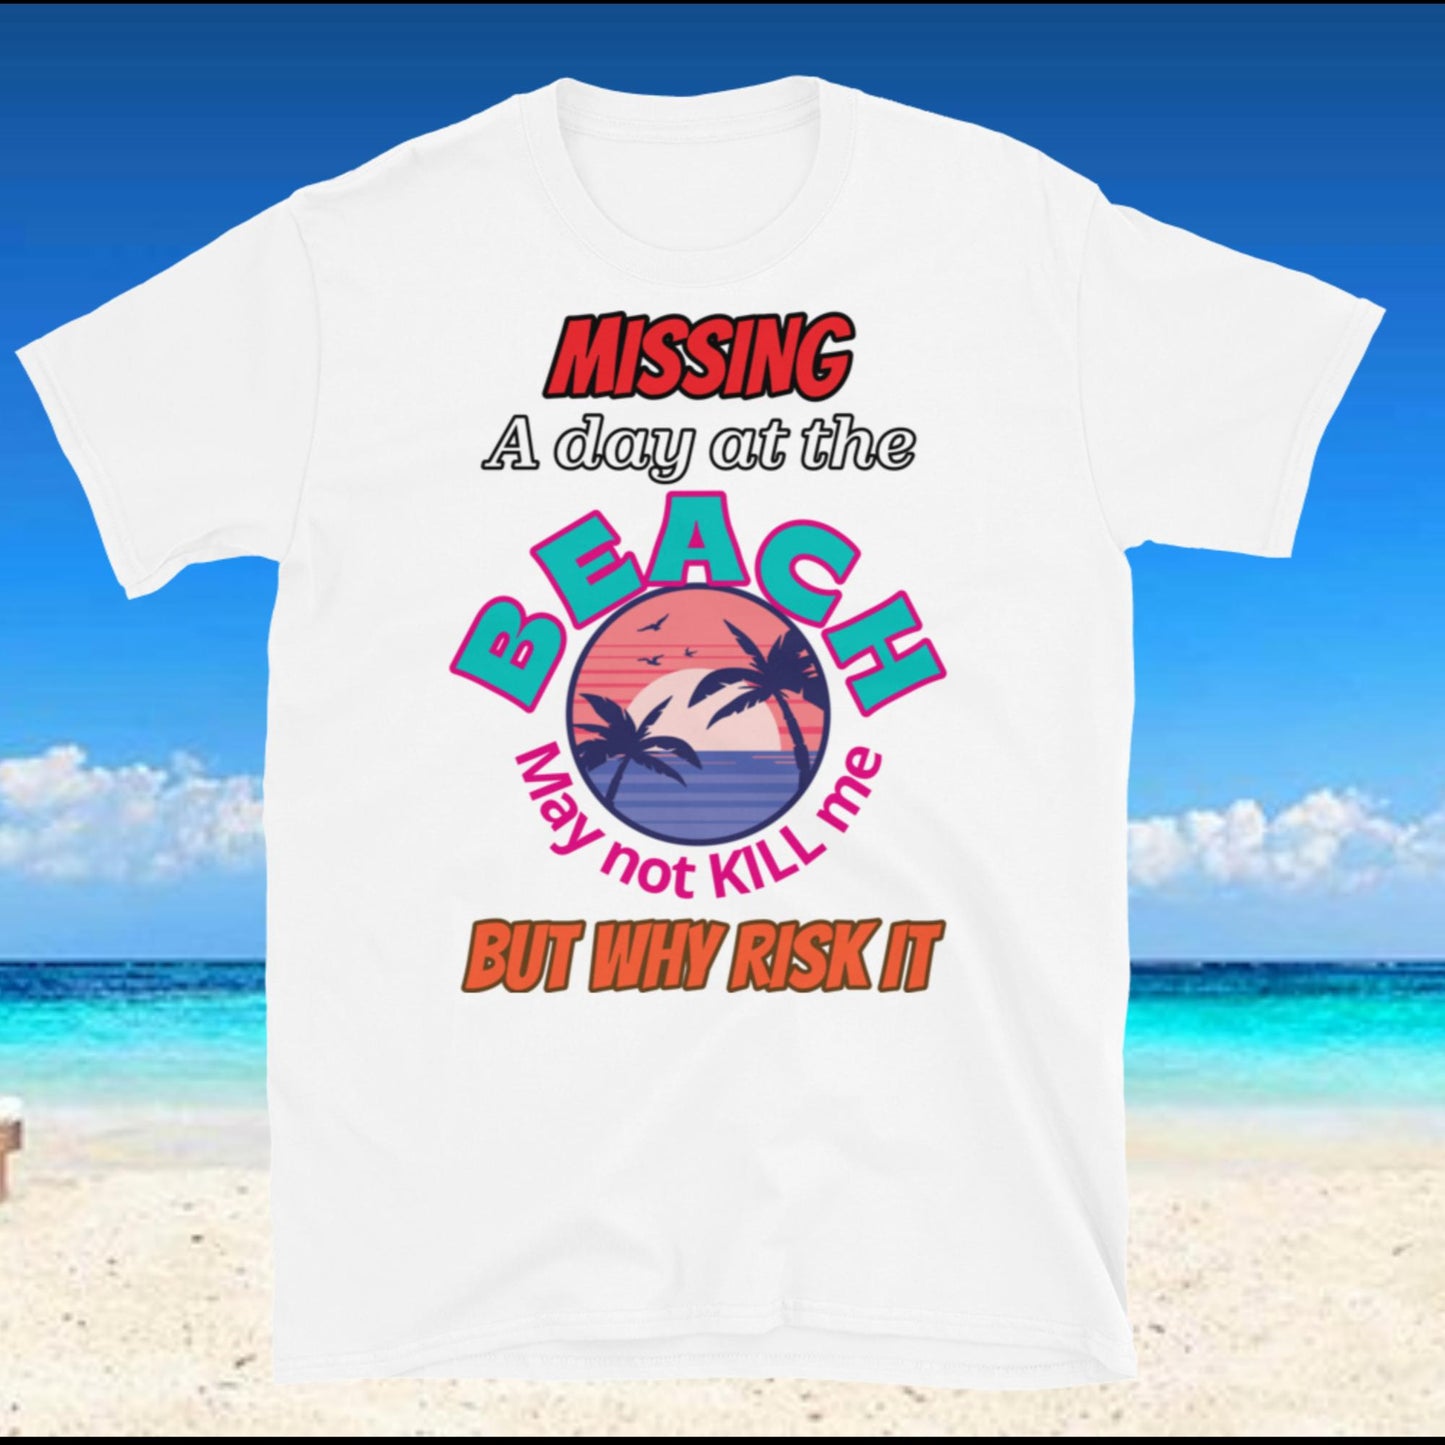 "Missing a Day at The Beach" - Short-Sleeve Unisex T-Shirt